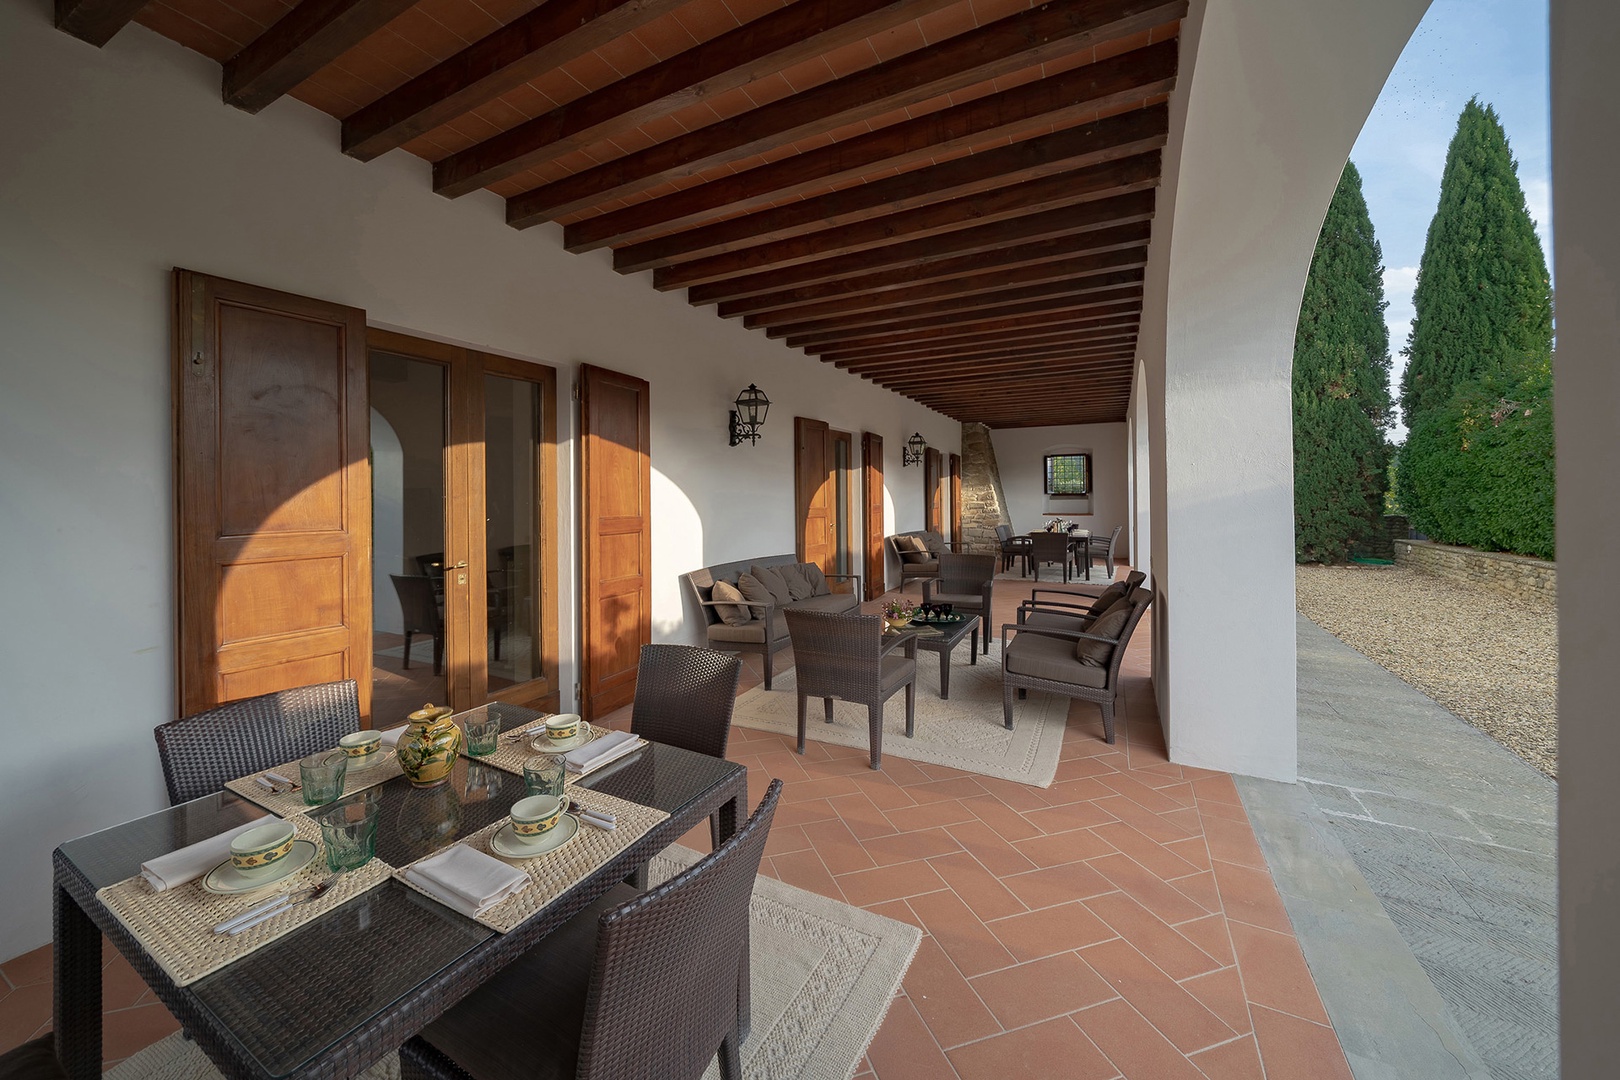 Shaded outdoor loggia with lounge chairs and outdoor dining.